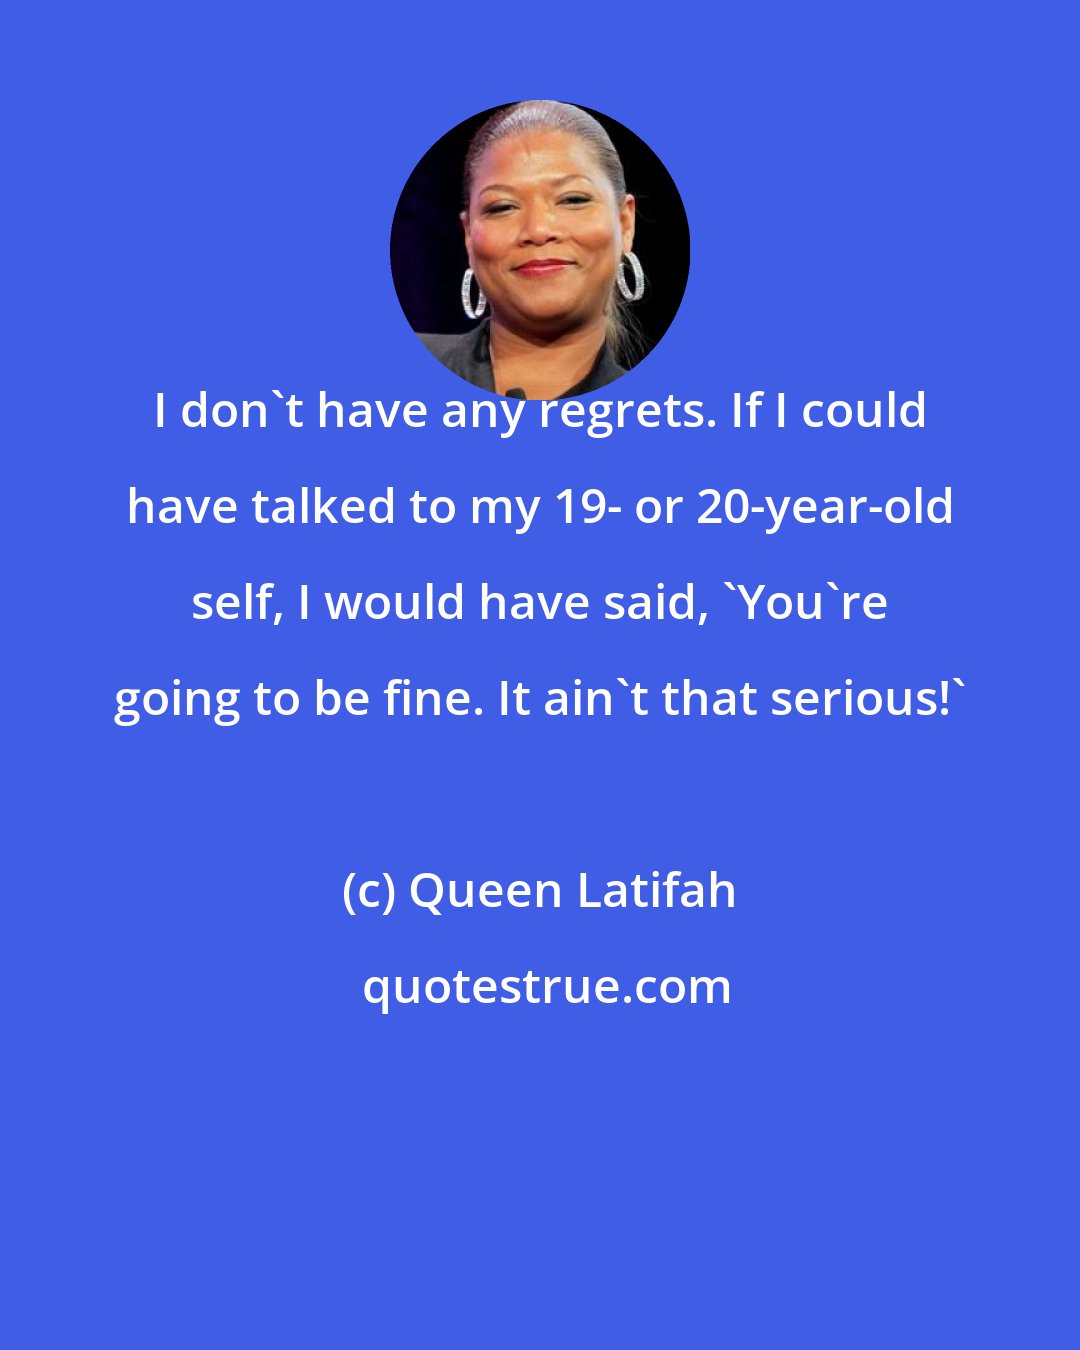 Queen Latifah: I don't have any regrets. If I could have talked to my 19- or 20-year-old self, I would have said, 'You're going to be fine. It ain't that serious!'